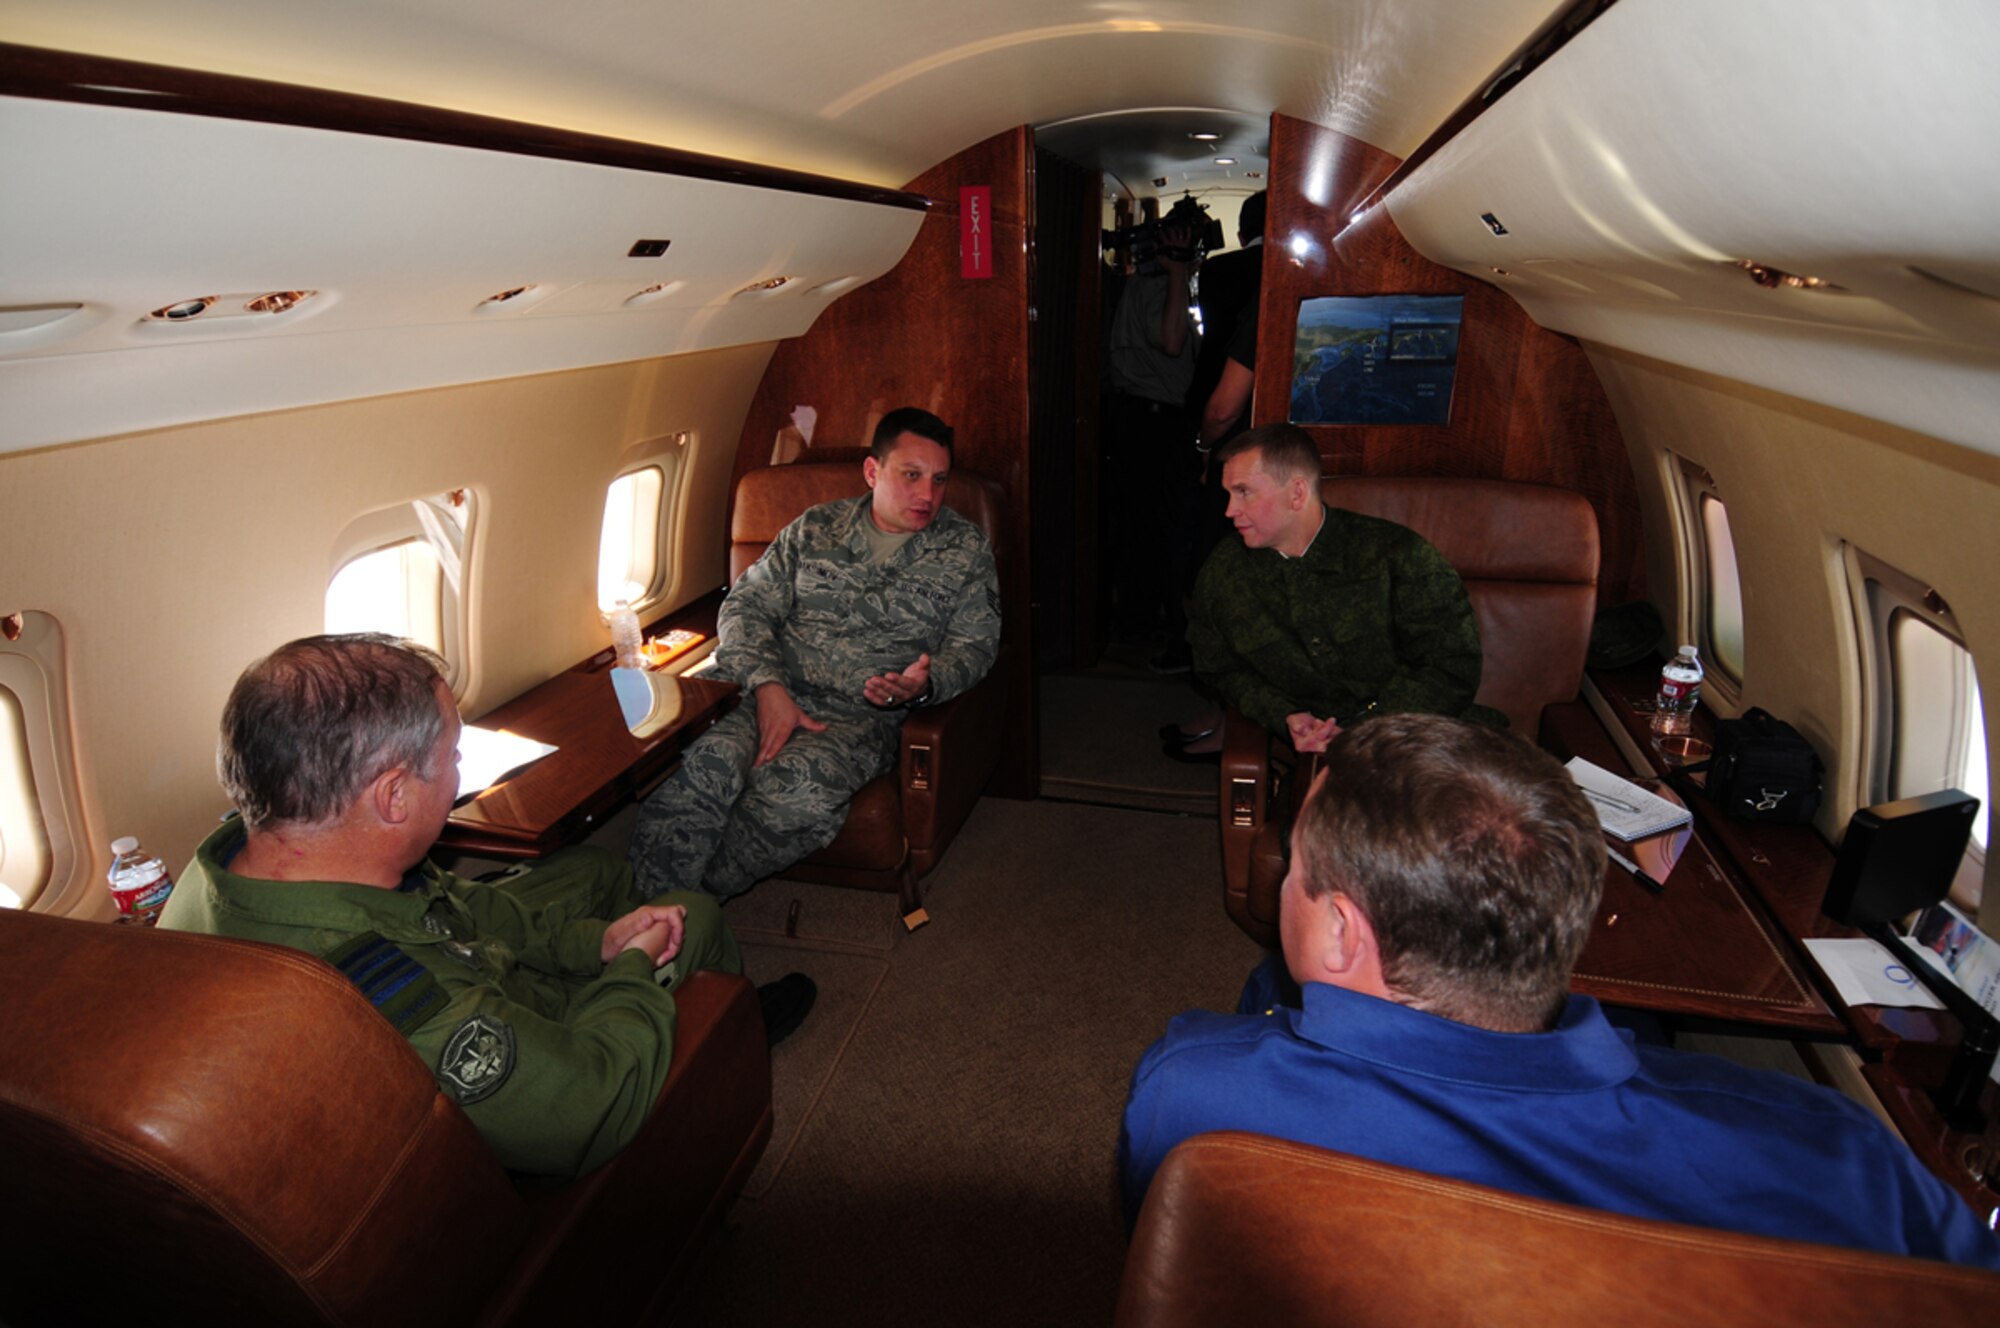 (Left to Right)  Canadian Col. Todd Balfe, Deputy Director, Alaskan NORAD Region; Staff Sgt. Yevgeniy Maksimov, Interpreter, Defense Threat Reduction Agency; Russian Col. Alexander Tikhonov, Editor Star; and Russian Col. Alexander Vasilyev, Russian Air Force Academy, discuss mission details on board the “Track of Interest” during Exercise Vigilant Eagle Aug. 7.  The exercise provided the opportunity for Russia, Canada and the United States to enhance their interagency partnership to cooperatively identify, intercept and follow a suspected hijacked aircraft as it proceeded across international boundaries. (U.S. Air Force photo by Capt. Uriah Orland)